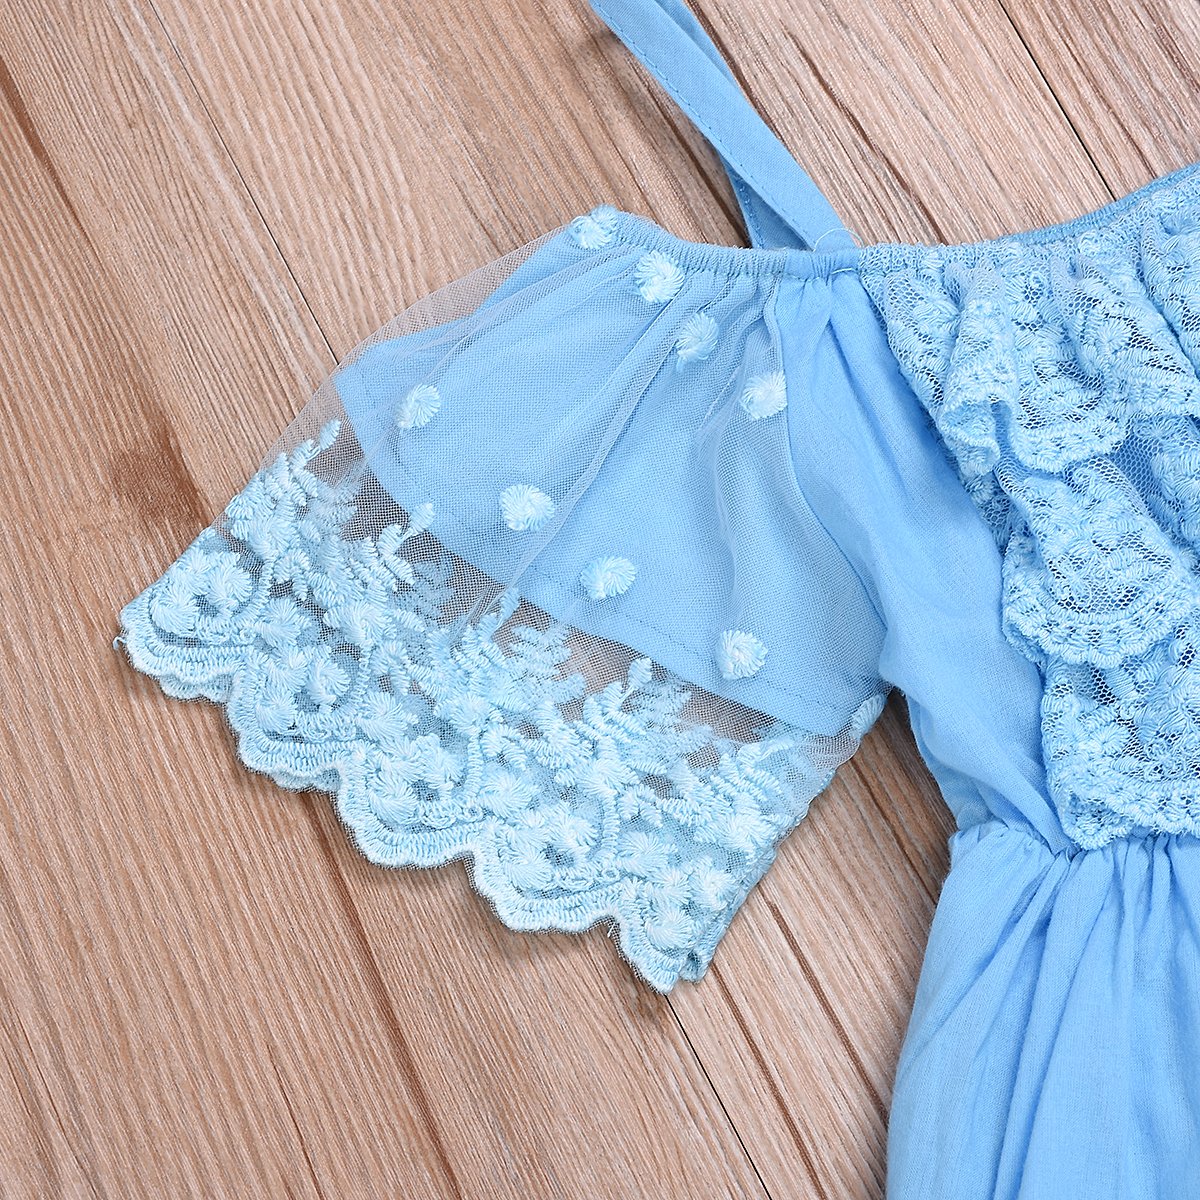 Fashionable Girls Ruffle Trim Solid Color Lace Suspender Dress